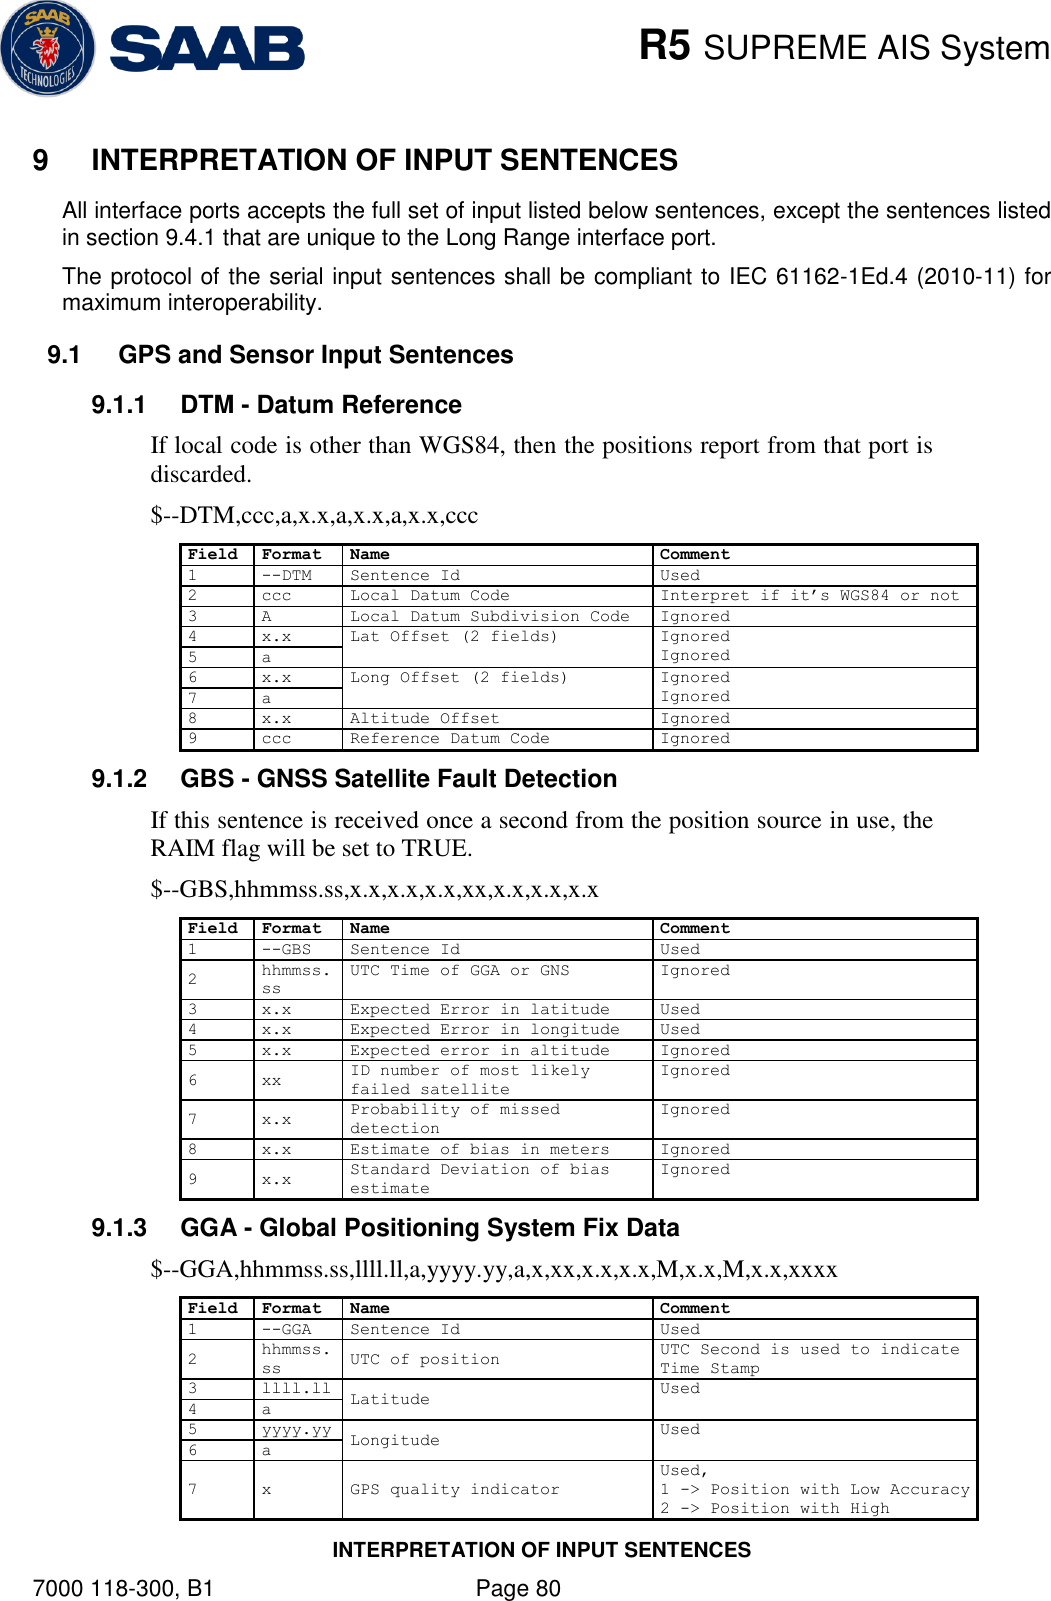    R5 SUPREME AIS System INTERPRETATION OF INPUT SENTENCES 7000 118-300, B1    Page 80 9  INTERPRETATION OF INPUT SENTENCES All interface ports accepts the full set of input listed below sentences, except the sentences listed in section 9.4.1 that are unique to the Long Range interface port. The protocol of the serial input sentences shall be compliant to IEC 61162-1Ed.4 (2010-11) for maximum interoperability. 9.1  GPS and Sensor Input Sentences 9.1.1  DTM - Datum Reference If local code is other than WGS84, then the positions report from that port is discarded. $--DTM,ccc,a,x.x,a,x.x,a,x.x,ccc Field Format Name Comment 1 --DTM Sentence Id Used 2 ccc Local Datum Code Interpret if it’s WGS84 or not 3 A Local Datum Subdivision Code Ignored 4 x.x Lat Offset (2 fields) Ignored Ignored 5 a 6 x.x Long Offset (2 fields) Ignored Ignored 7 a 8 x.x Altitude Offset Ignored 9 ccc Reference Datum Code Ignored 9.1.2  GBS - GNSS Satellite Fault Detection If this sentence is received once a second from the position source in use, the RAIM flag will be set to TRUE. $--GBS,hhmmss.ss,x.x,x.x,x.x,xx,x.x,x.x,x.x Field Format Name Comment 1 --GBS Sentence Id Used 2 hhmmss.ss UTC Time of GGA or GNS Ignored 3 x.x Expected Error in latitude Used 4 x.x Expected Error in longitude Used 5 x.x Expected error in altitude Ignored 6 xx ID number of most likely failed satellite Ignored 7 x.x Probability of missed detection Ignored 8 x.x Estimate of bias in meters Ignored 9 x.x Standard Deviation of bias estimate Ignored 9.1.3  GGA - Global Positioning System Fix Data $--GGA,hhmmss.ss,llll.ll,a,yyyy.yy,a,x,xx,x.x,x.x,M,x.x,M,x.x,xxxx Field Format Name Comment 1 --GGA Sentence Id Used 2 hhmmss.ss UTC of position UTC Second is used to indicate Time Stamp 3 llll.ll Latitude Used  4 a 5 yyyy.yy Longitude Used 6 a 7 x GPS quality indicator Used, 1 -&gt; Position with Low Accuracy 2 -&gt; Position with High 